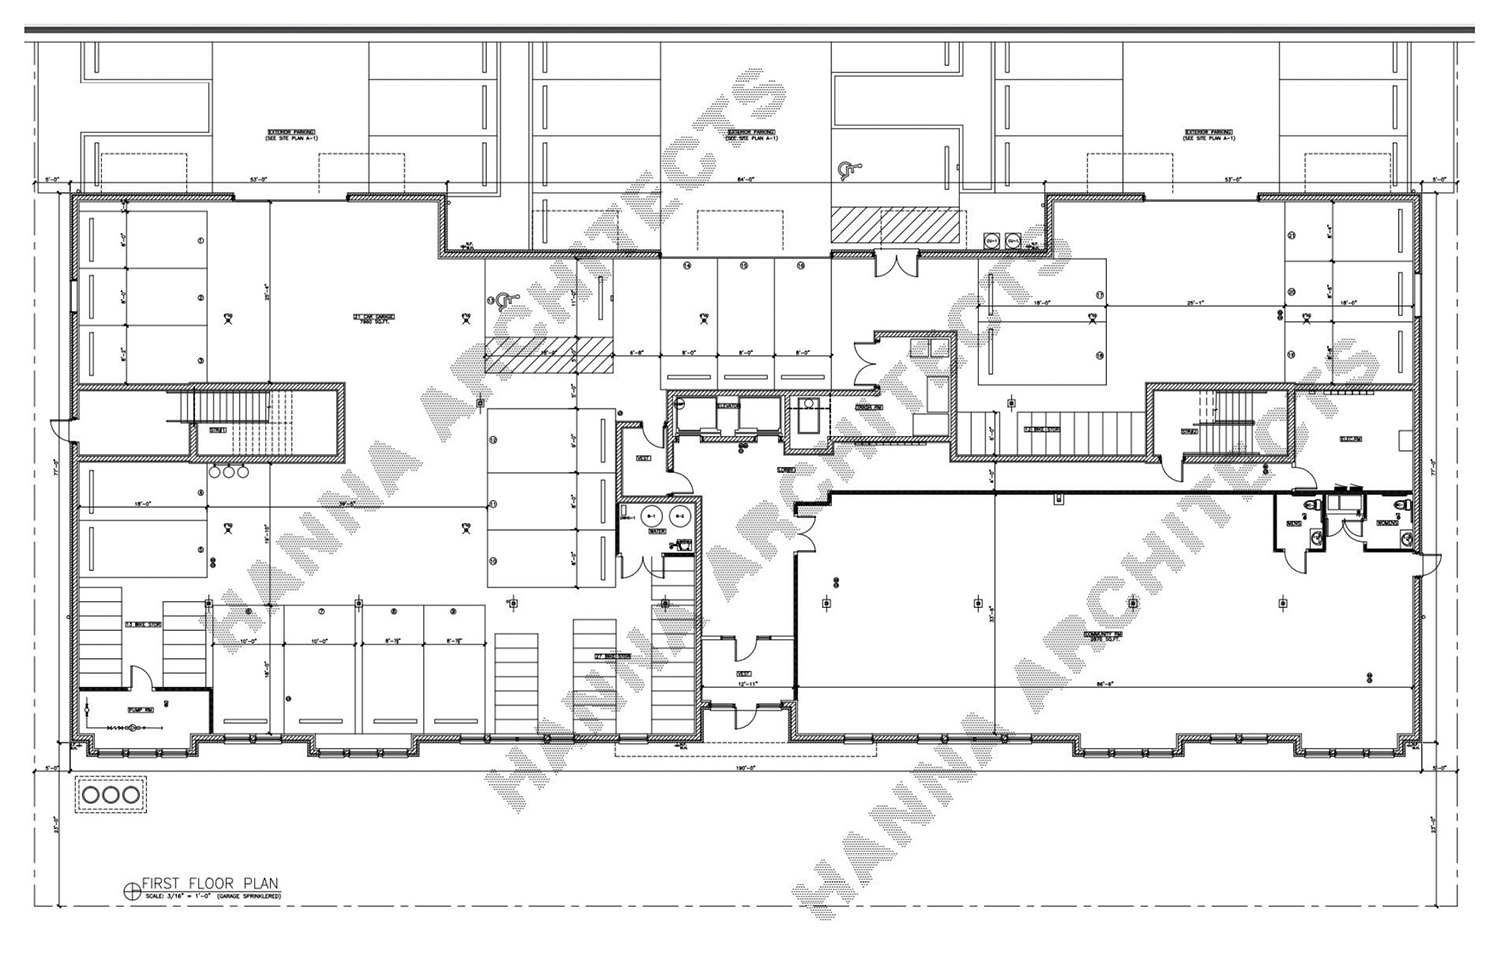 Ground Floor Plan for 5950 N Sheridan Road. Drawing by Hanna Architects